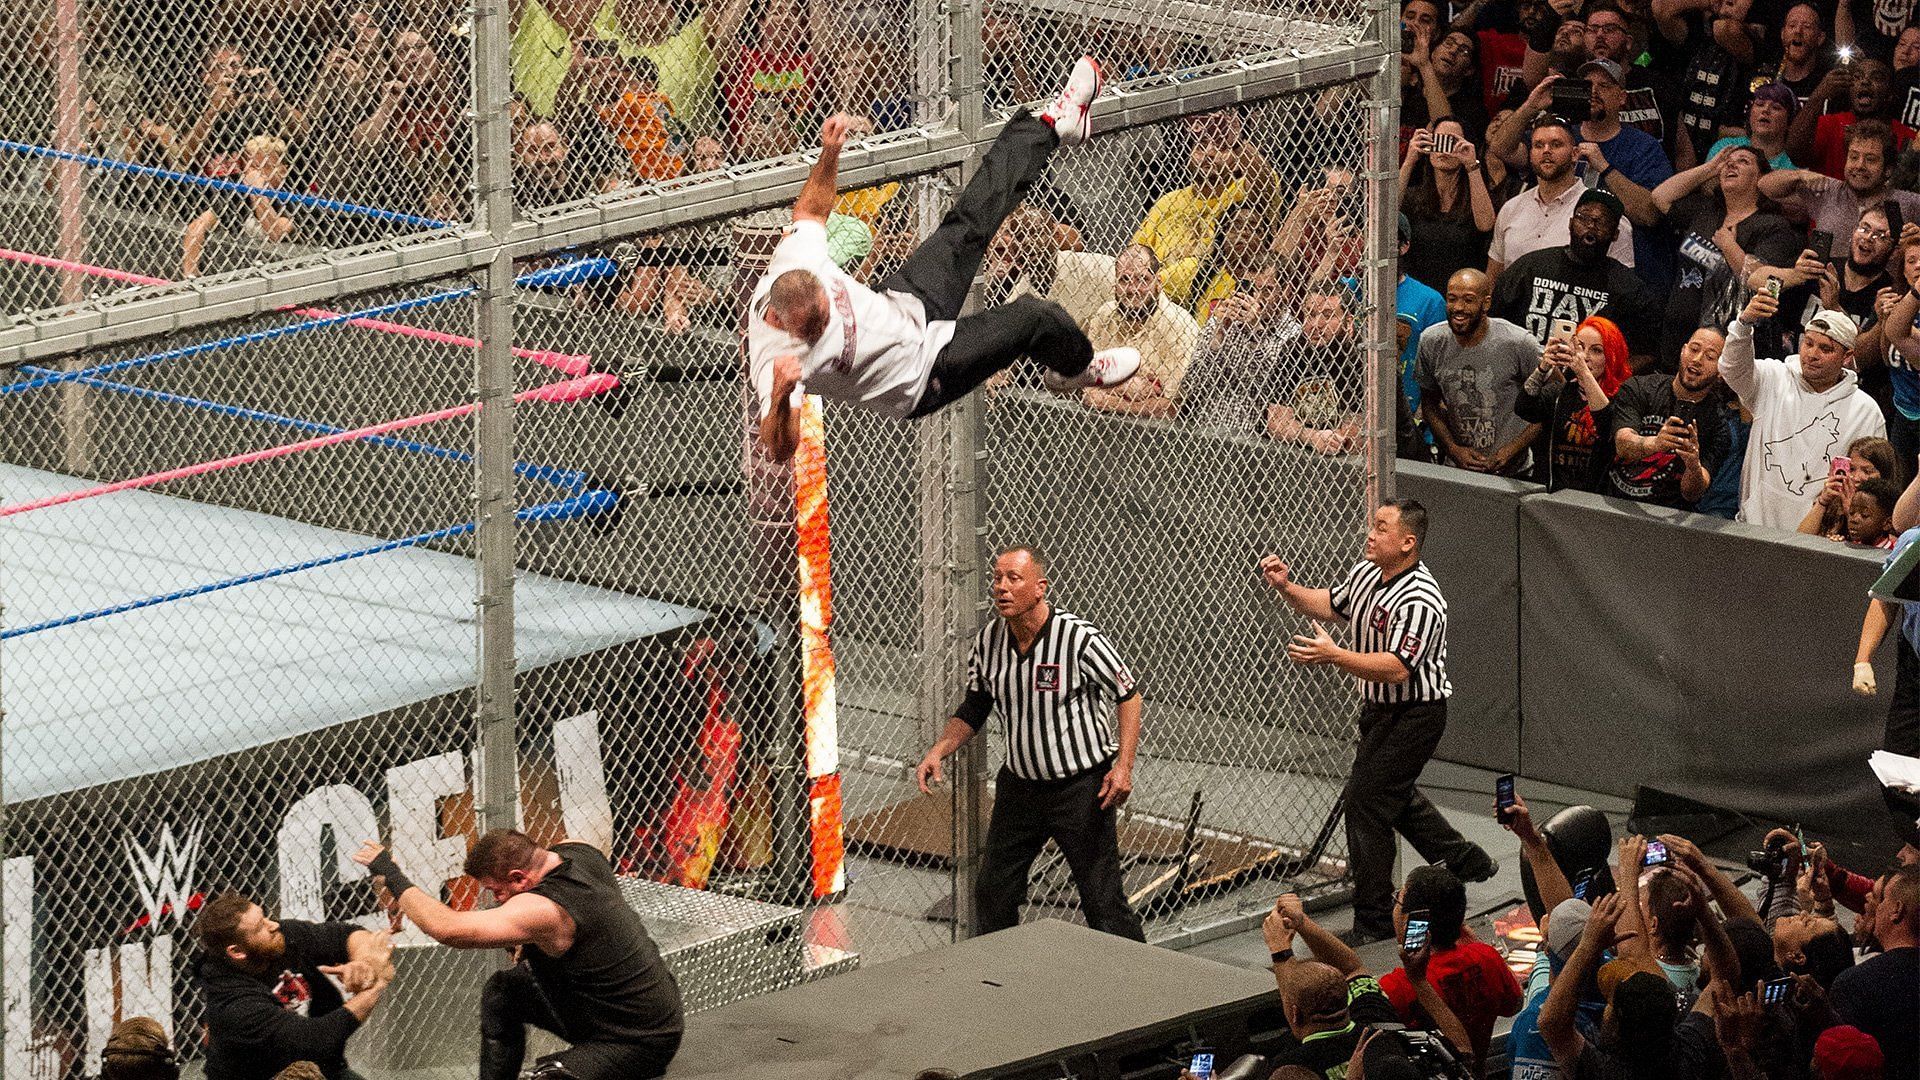 Shane McMahon jumped off the cage